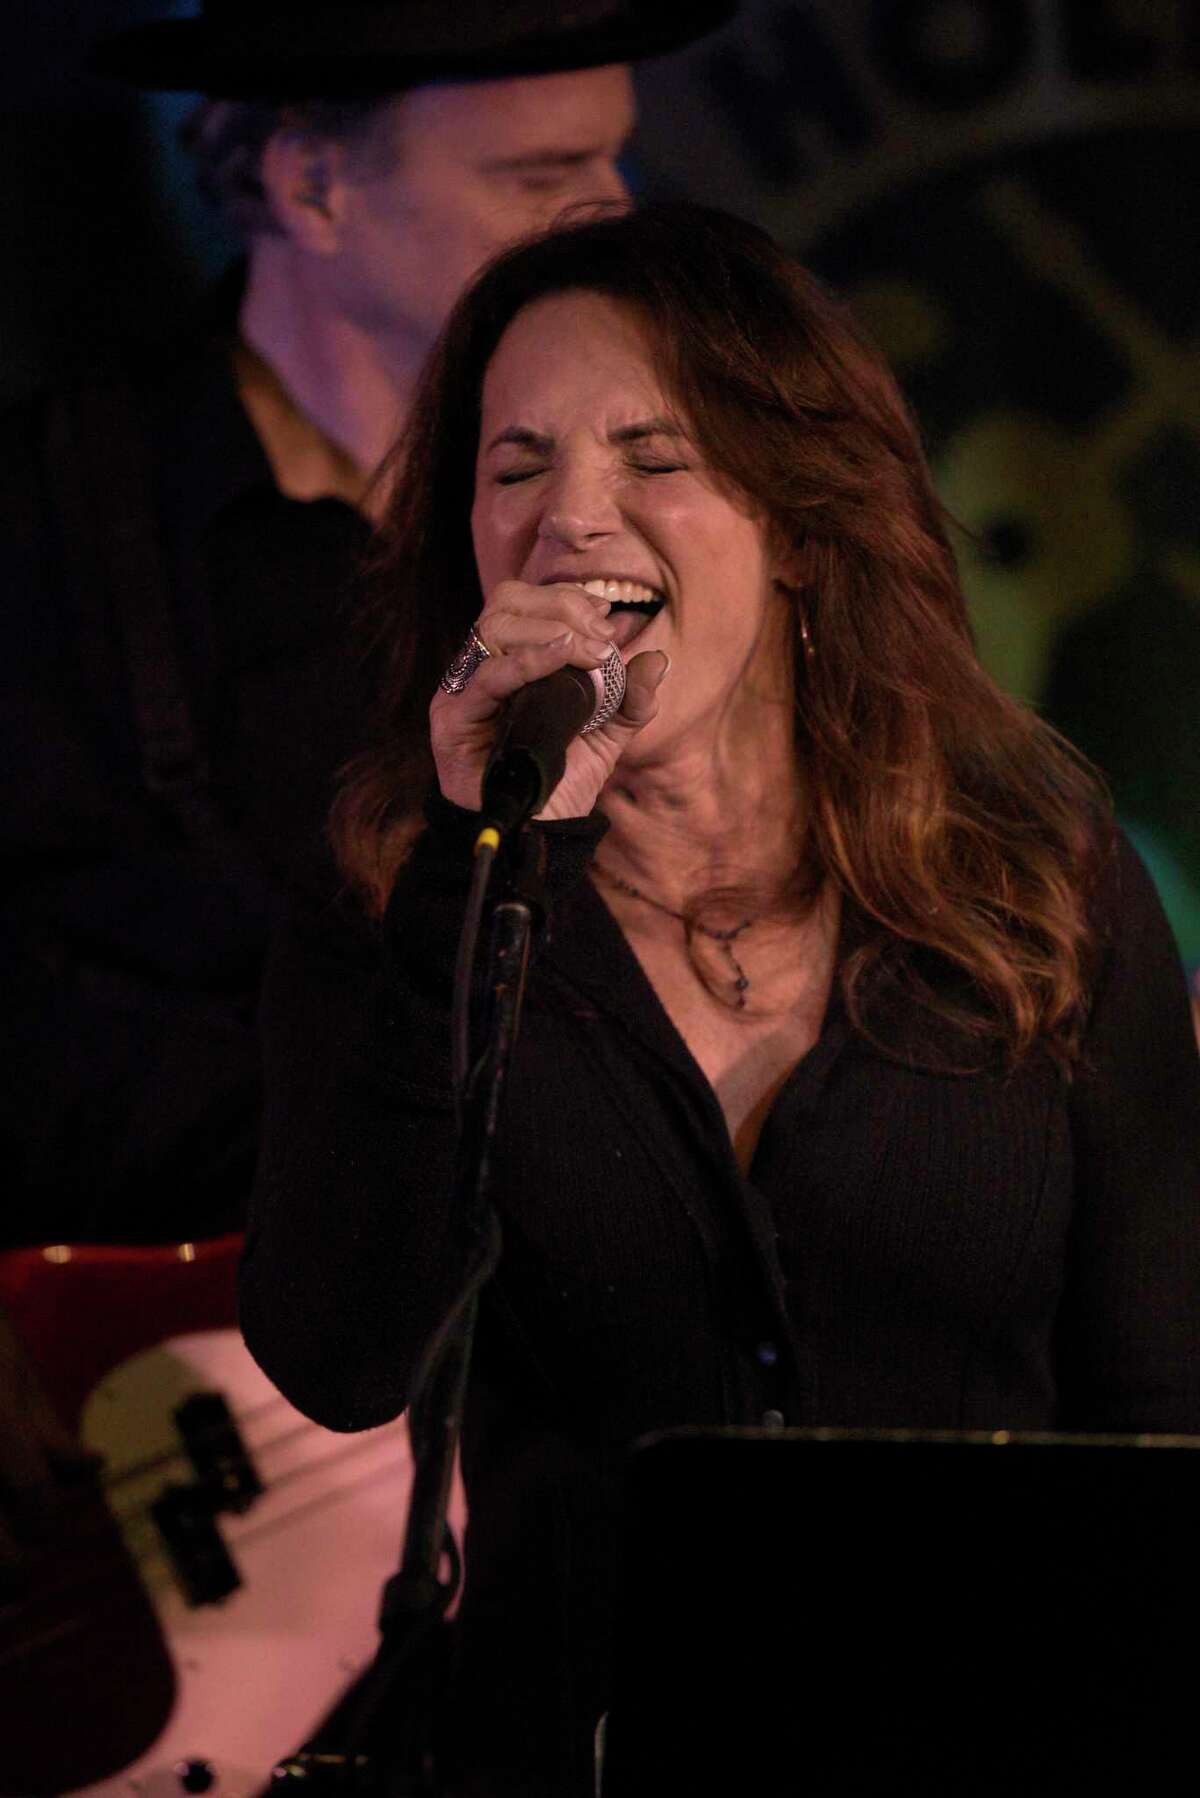 Singer Jill Rutsky, of Weston, performs during JD’S Jam night at Sugar Hollow Taproom, Connecticut’s newest music venue, located in Danbury on the Ridgefield border. Thursday night, February 10, 2022, Danbury, Conn.